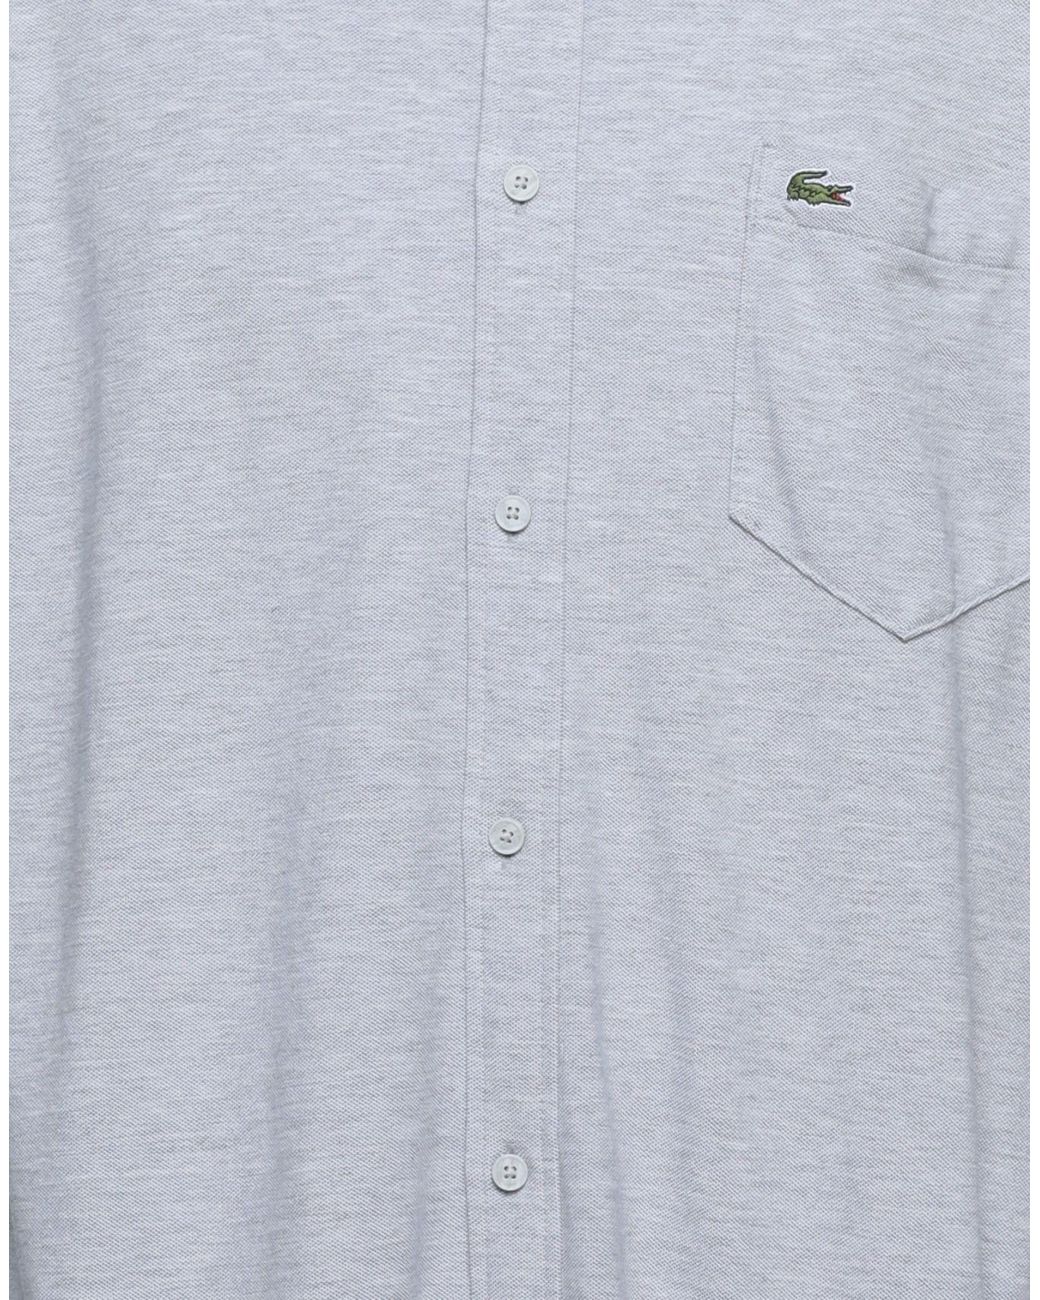 Lacoste Shirt in Grey (Gray) for Men - Lyst